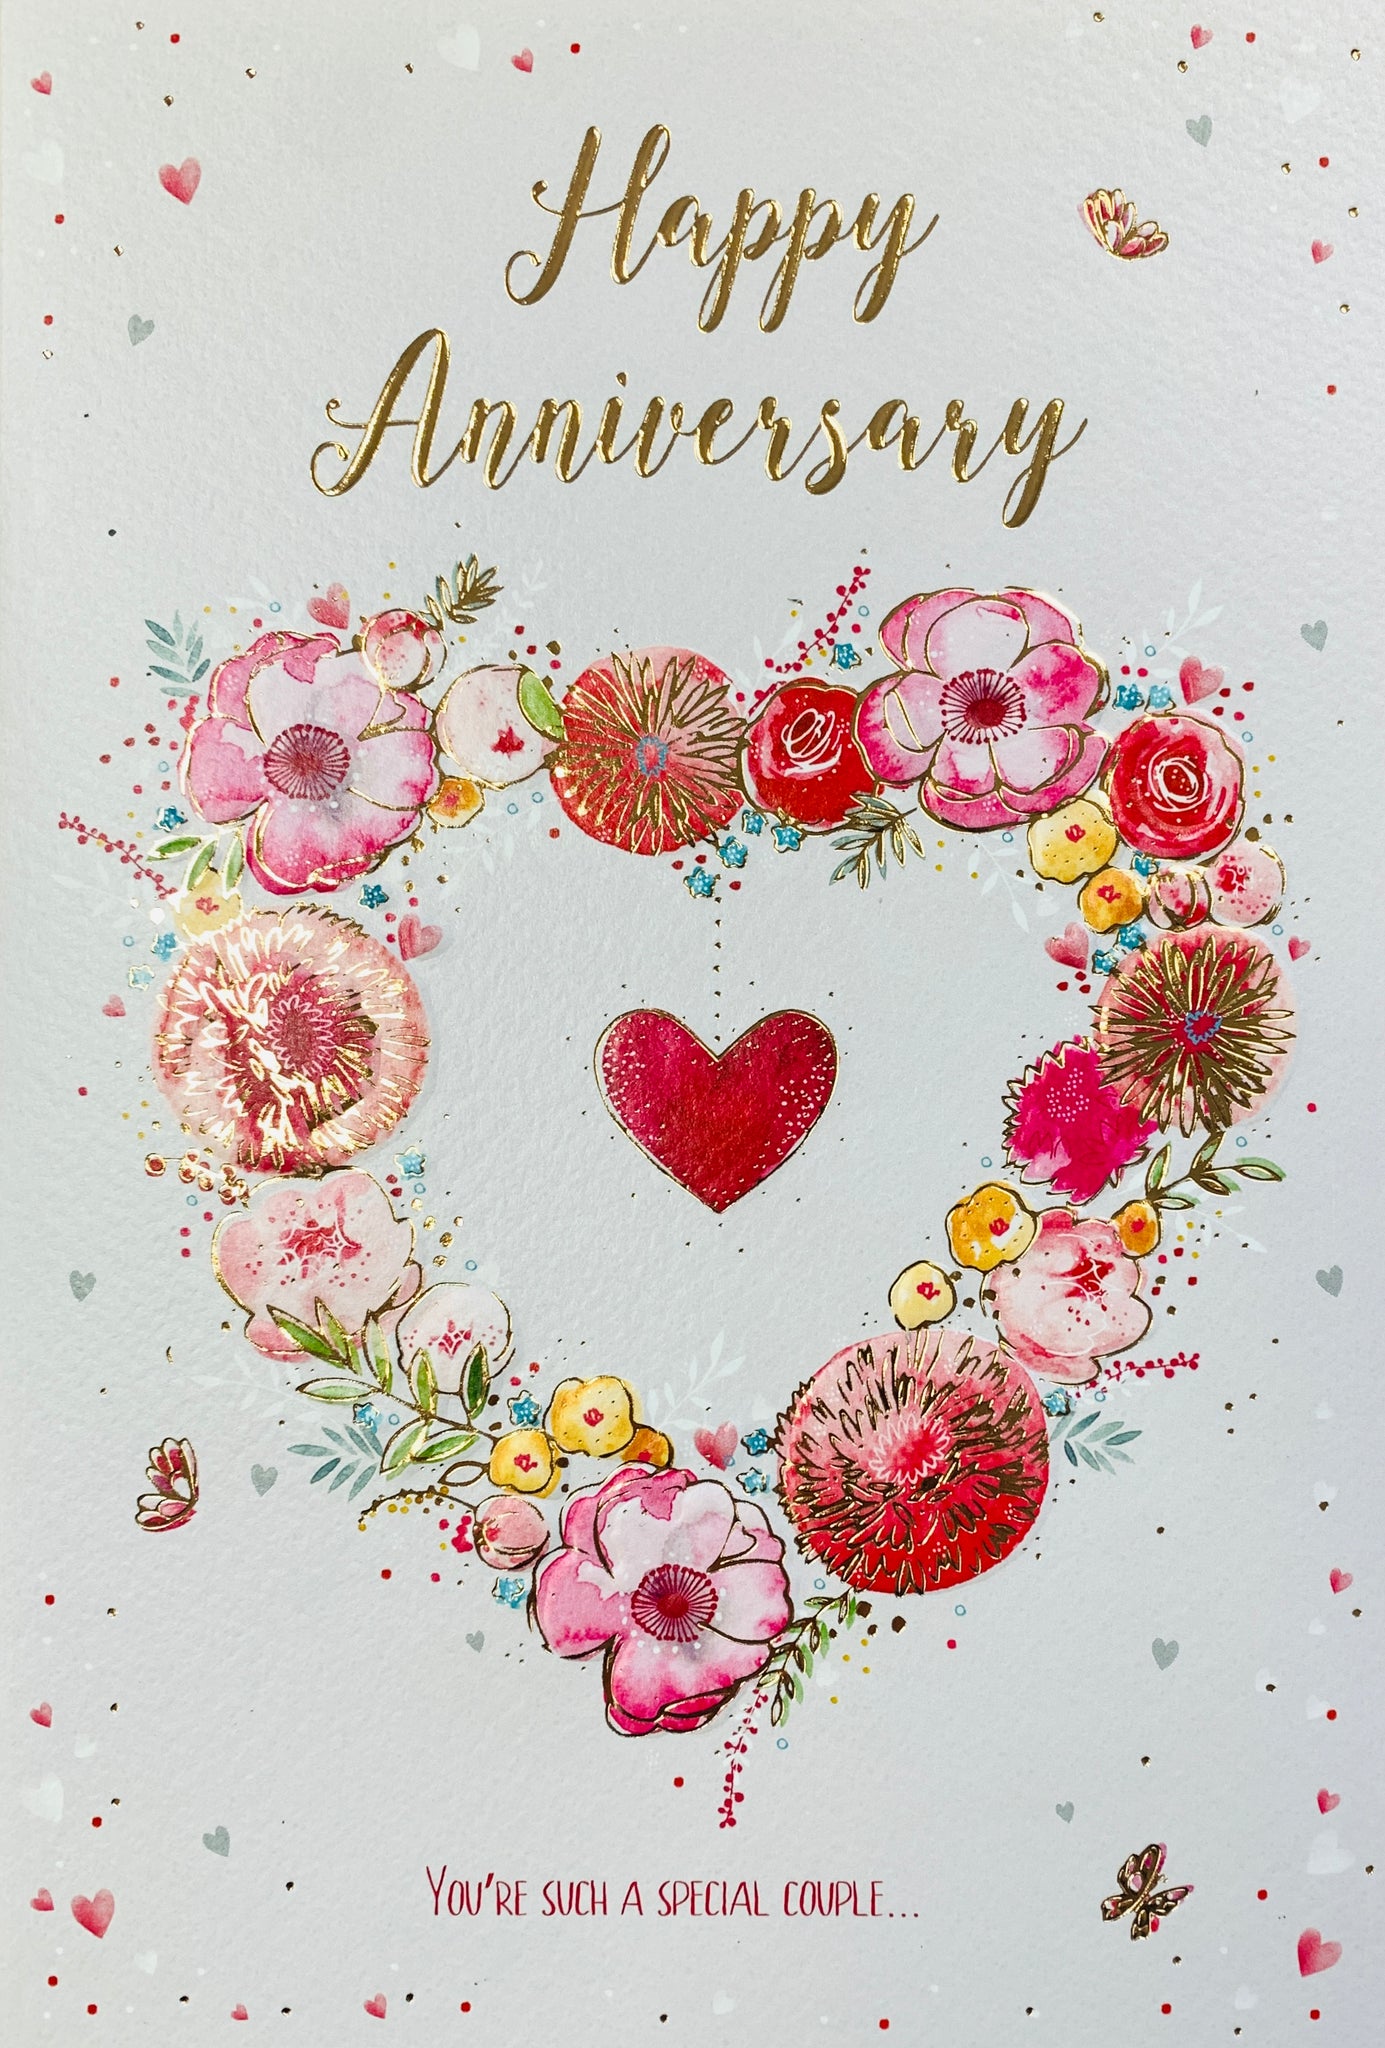 Your wedding anniversary card- floral heart